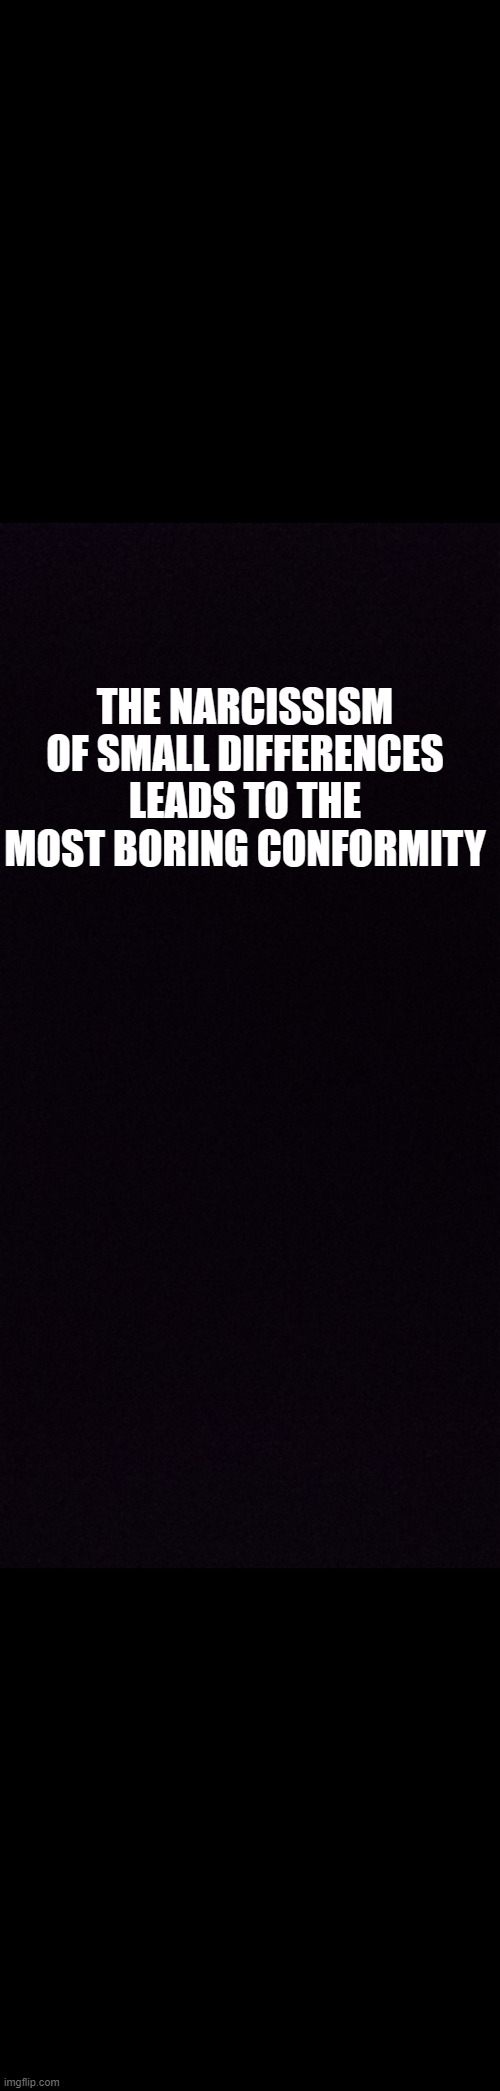 Fun times | THE NARCISSISM OF SMALL DIFFERENCES LEADS TO THE MOST BORING CONFORMITY | image tagged in enlighment is the new wealth | made w/ Imgflip meme maker